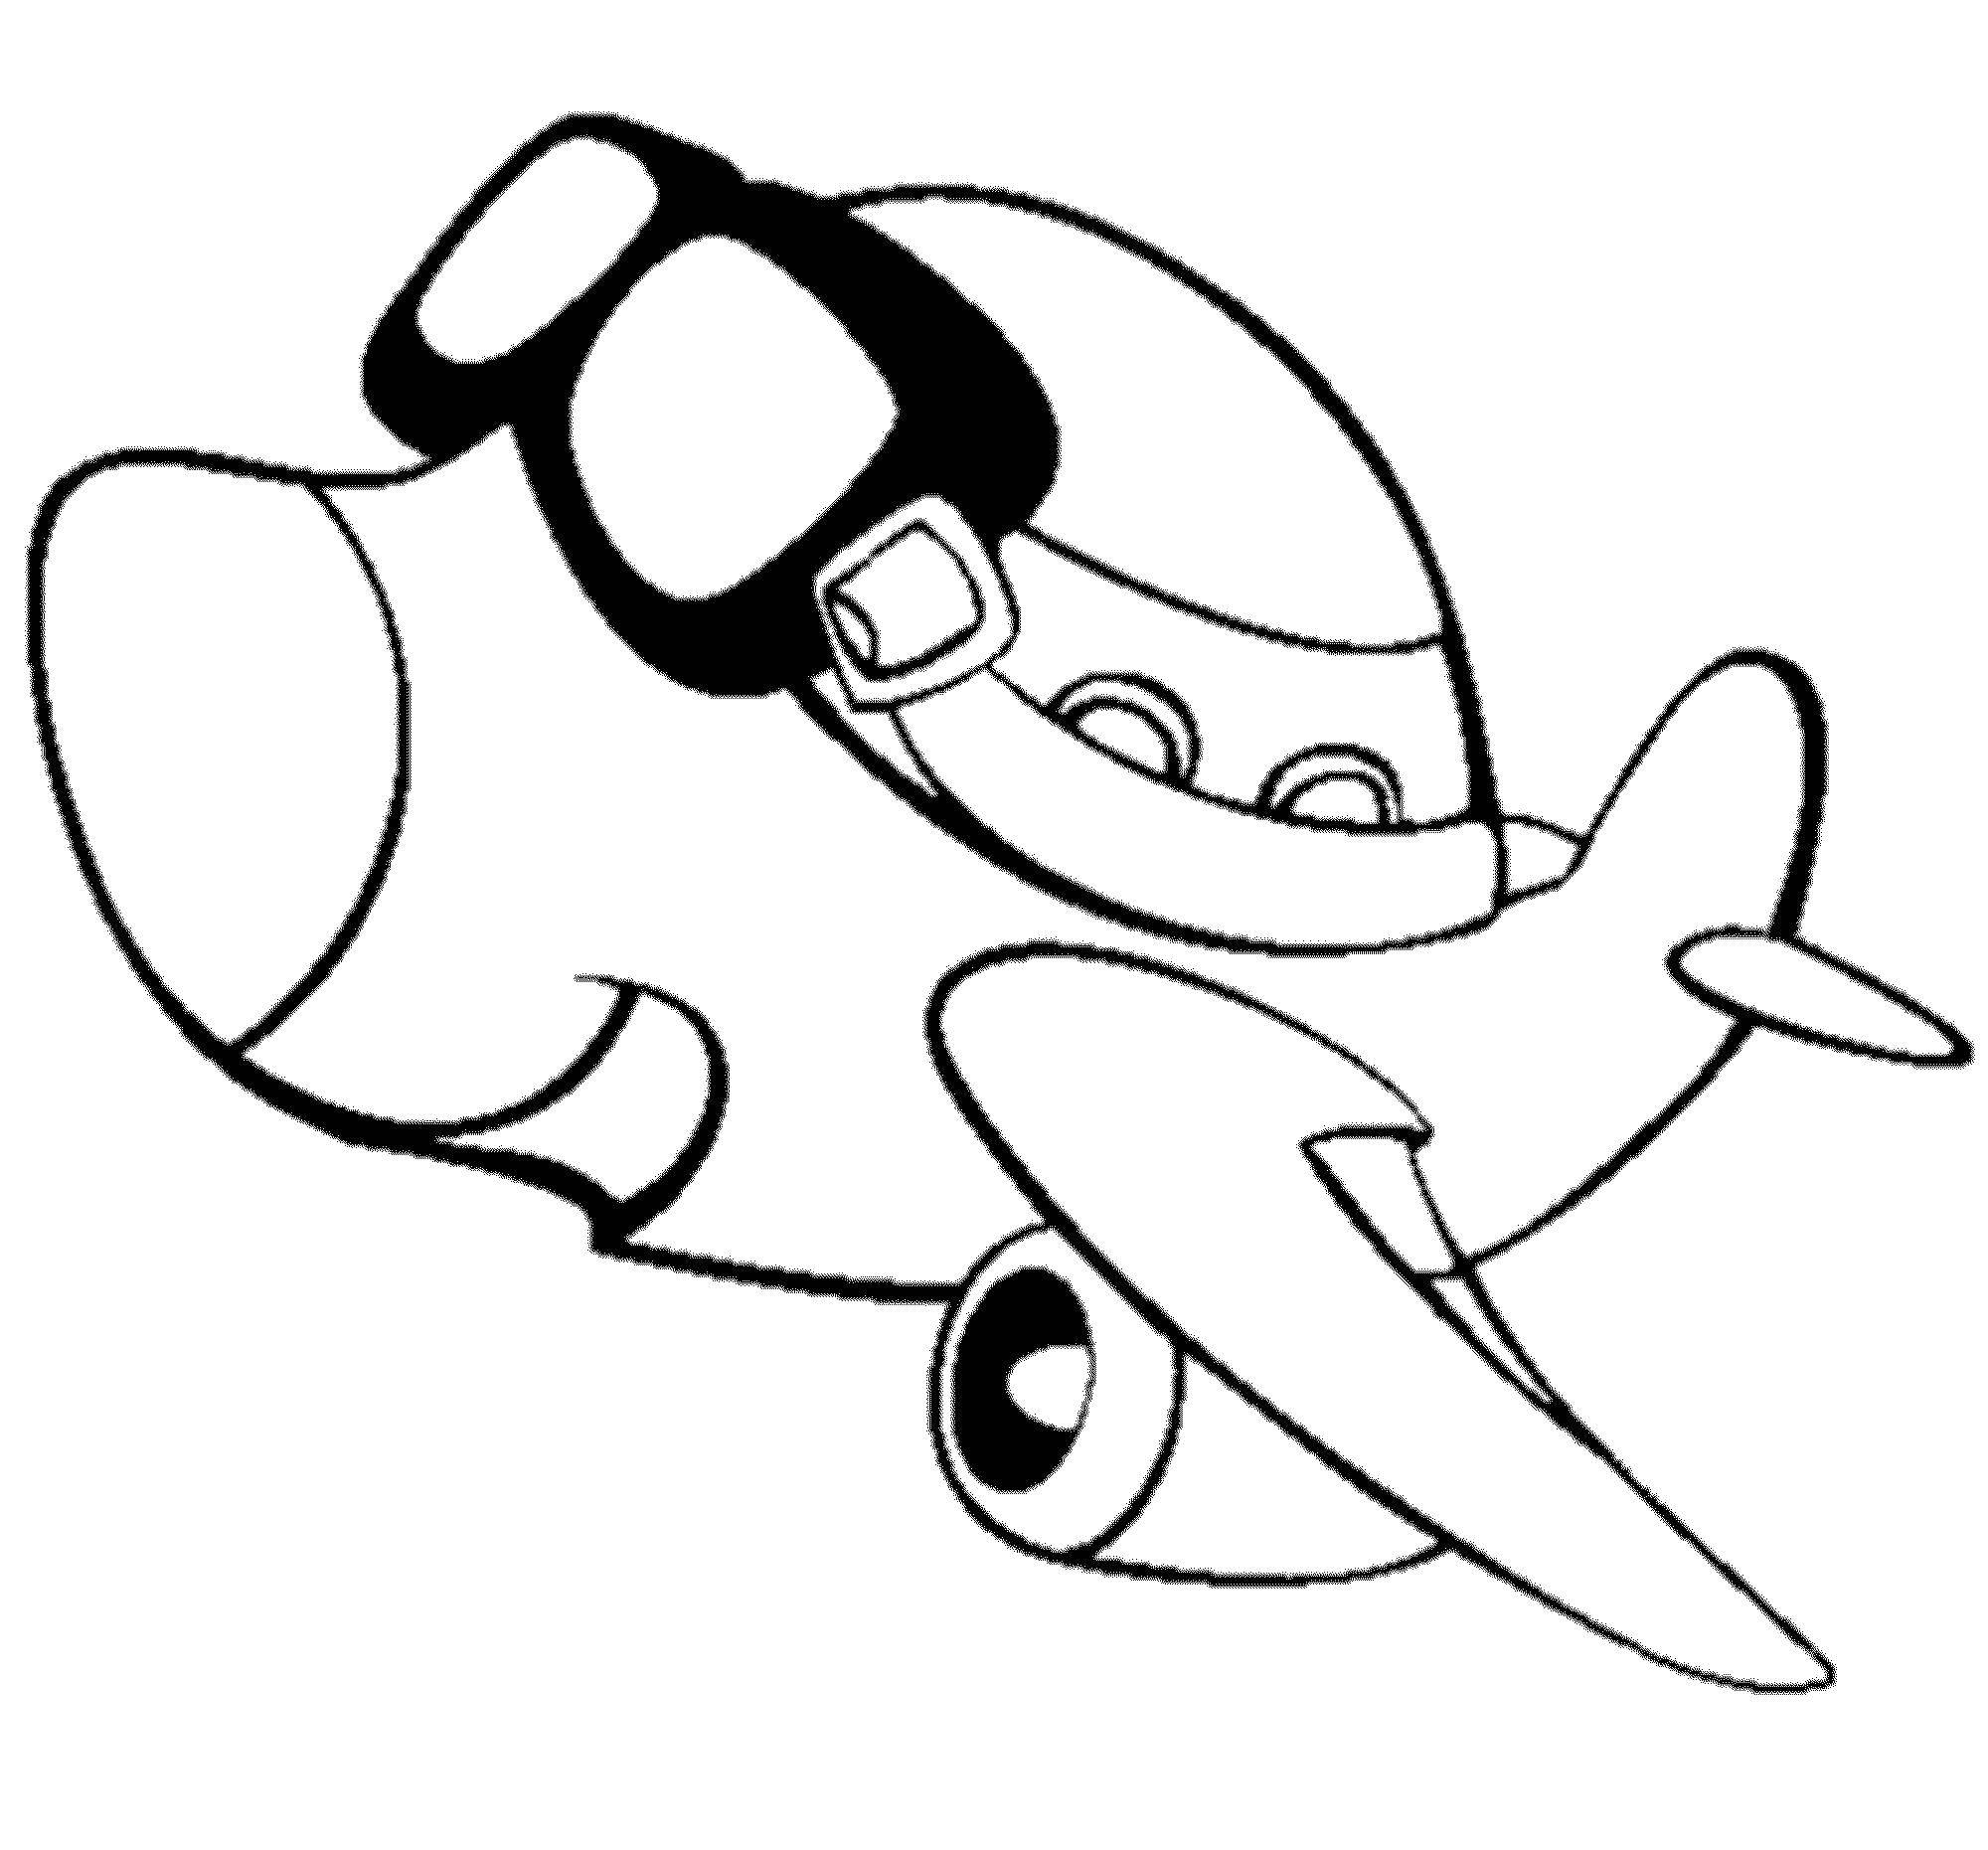 Coloring Airplane. Category coloring for little ones. Tags:  Plane.